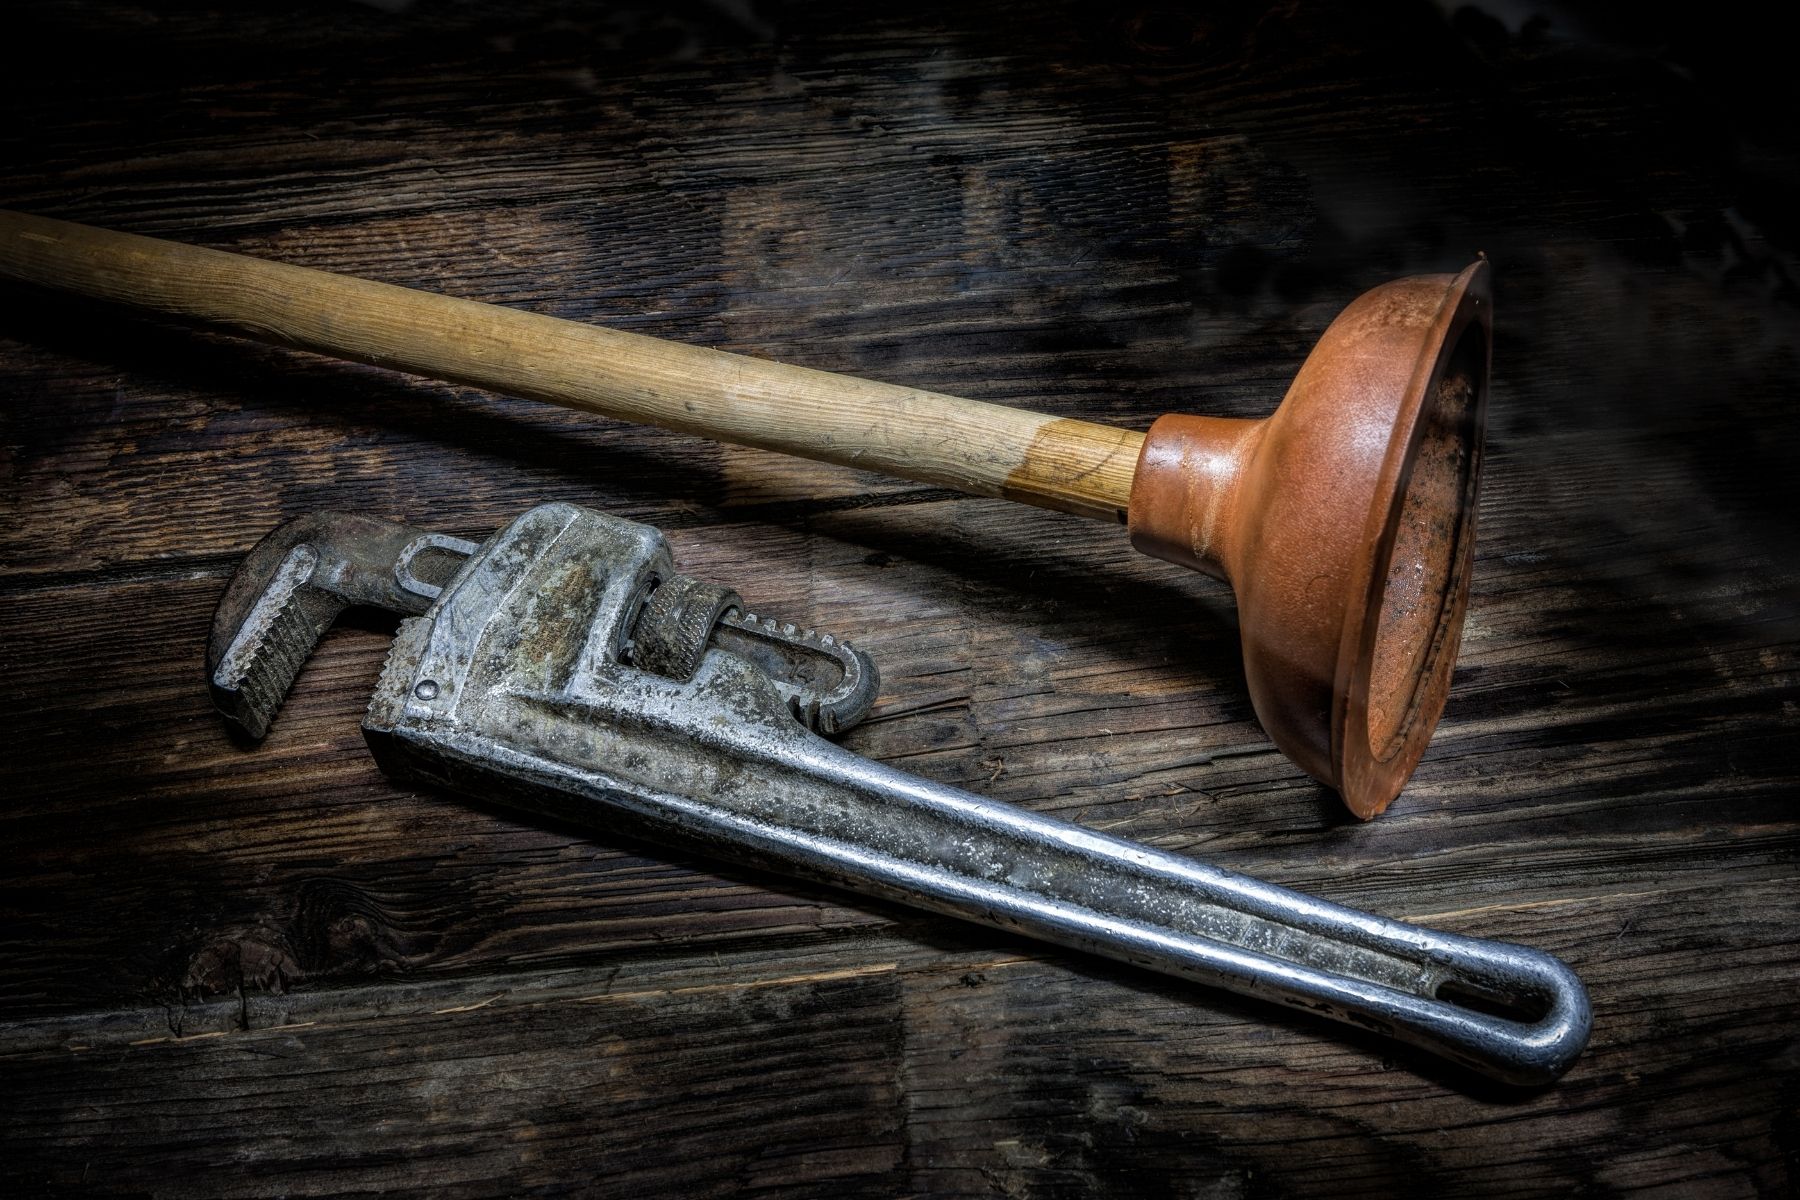 A List of Some Plumbing Tools Every Homeowner Should Own